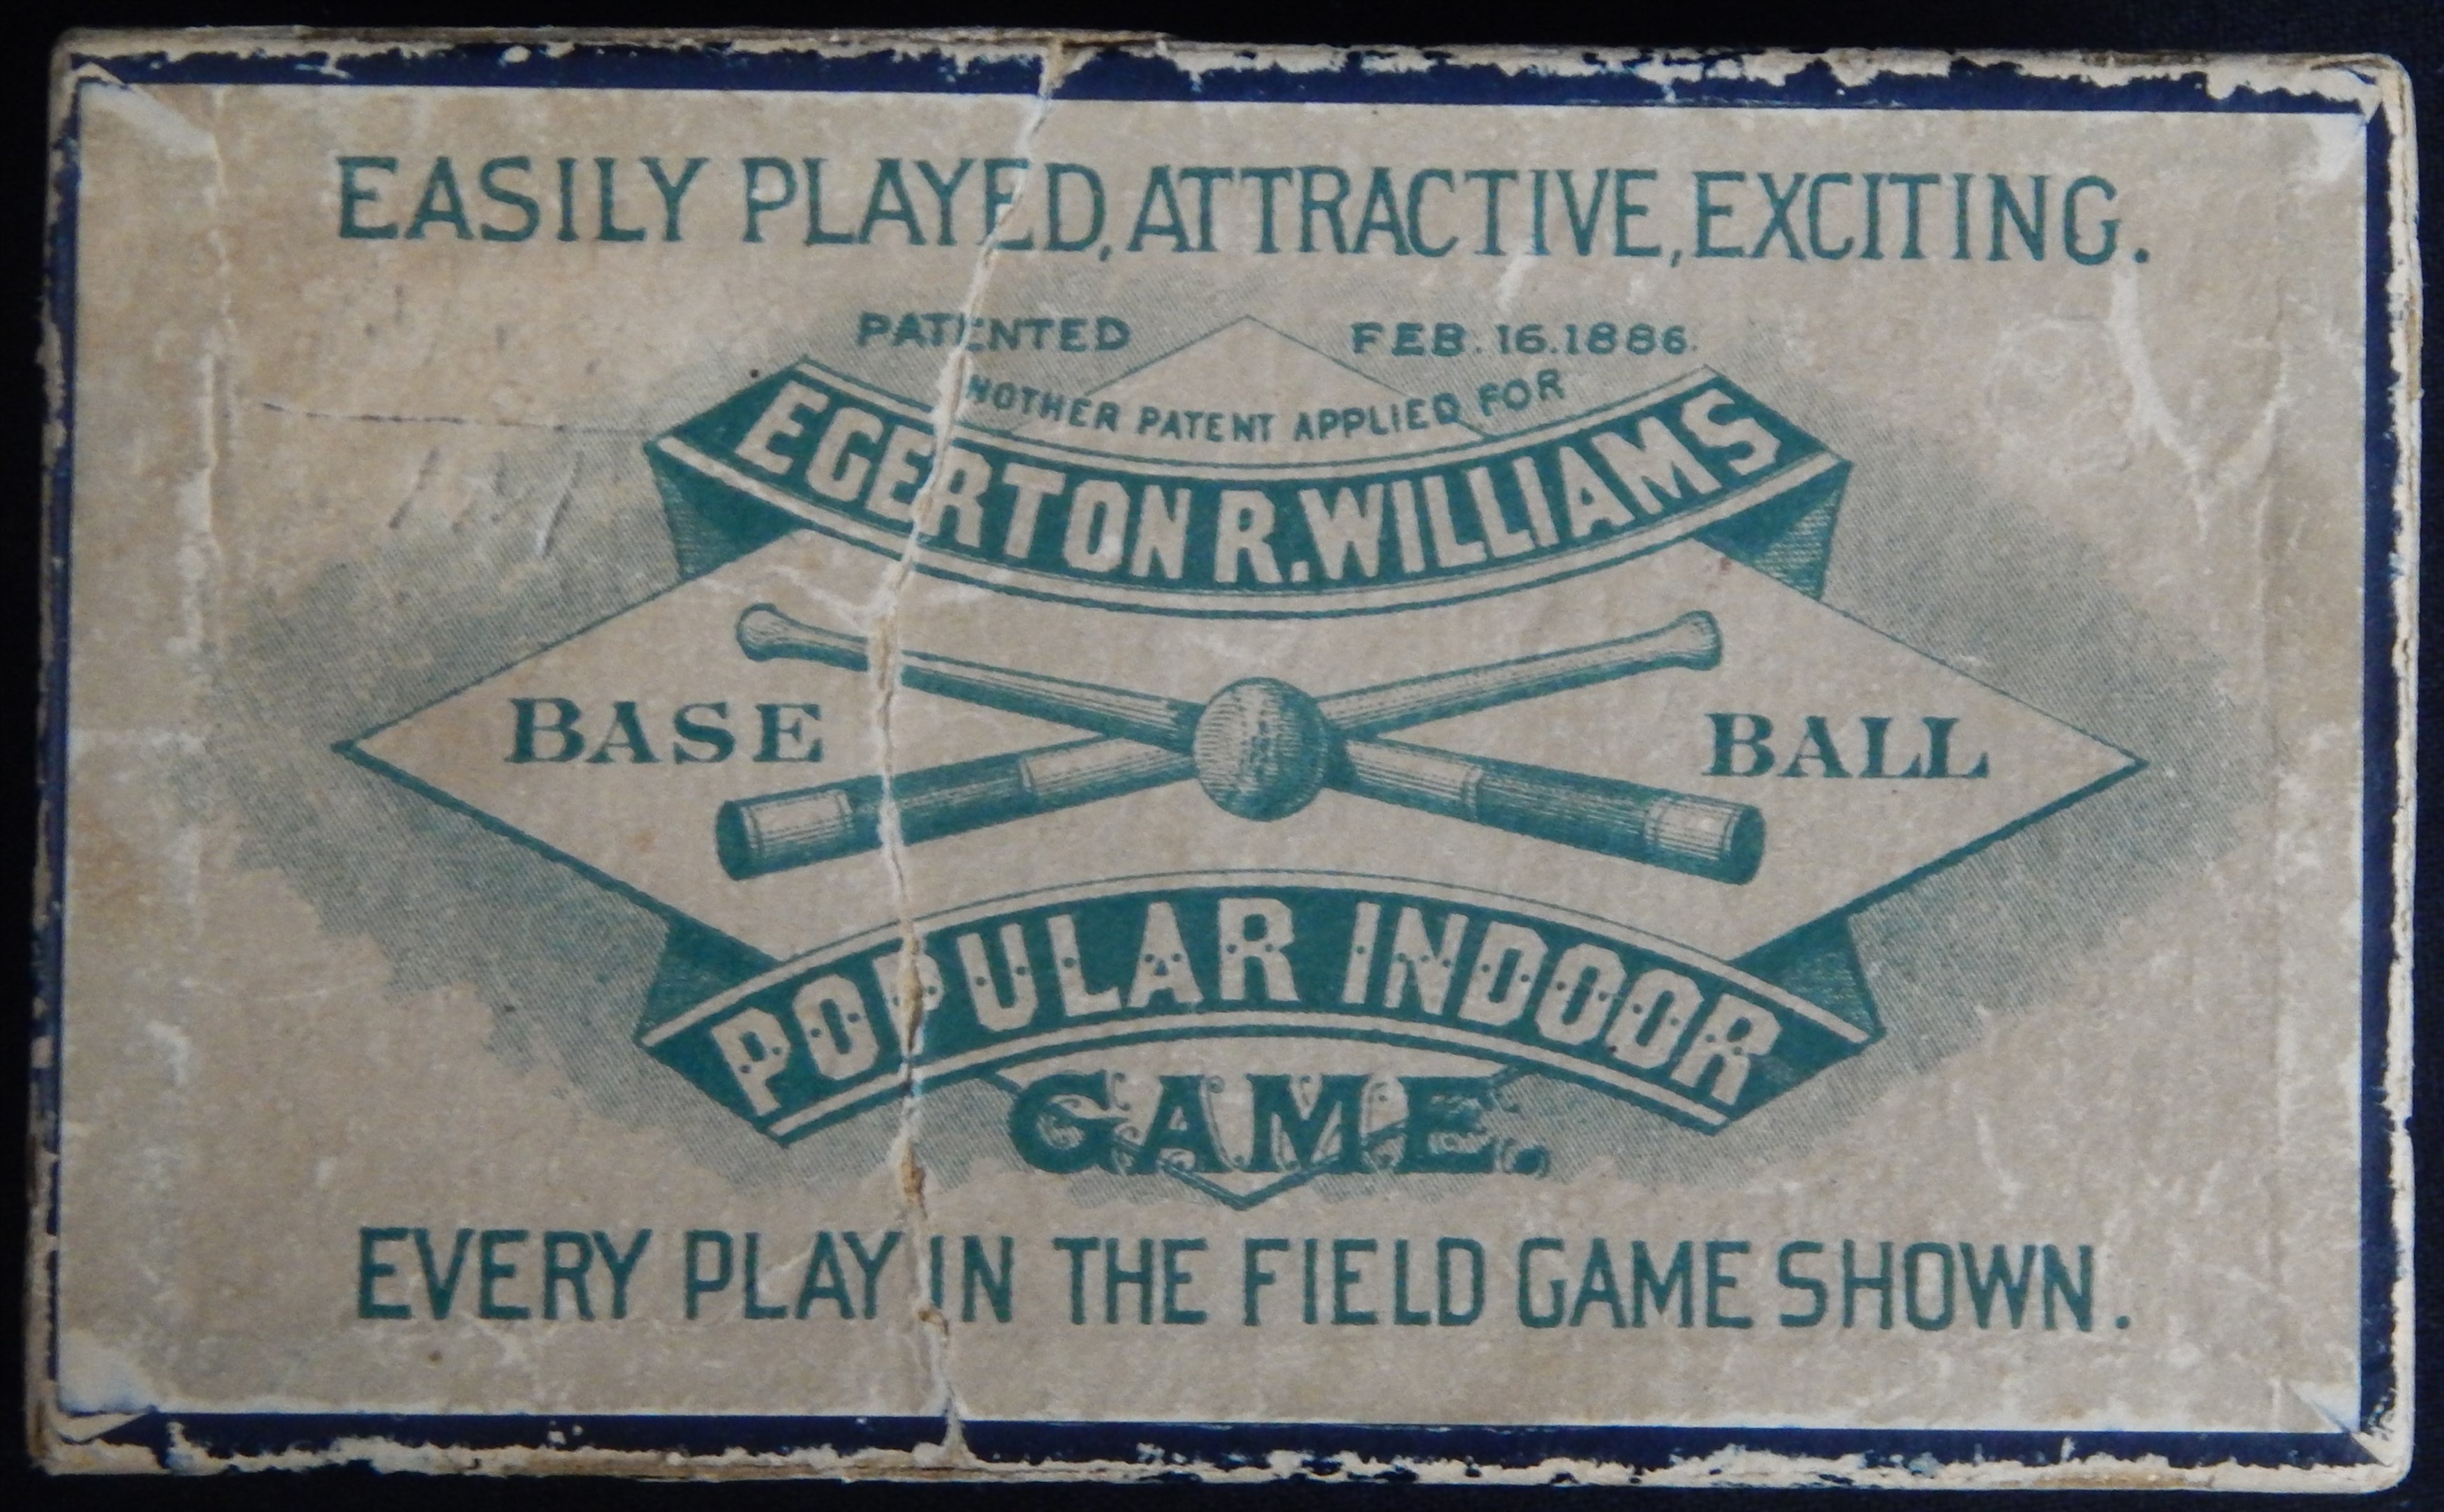 - 1886 Edgerton R. Williams Baseball Card Game Box and Playing Pieces